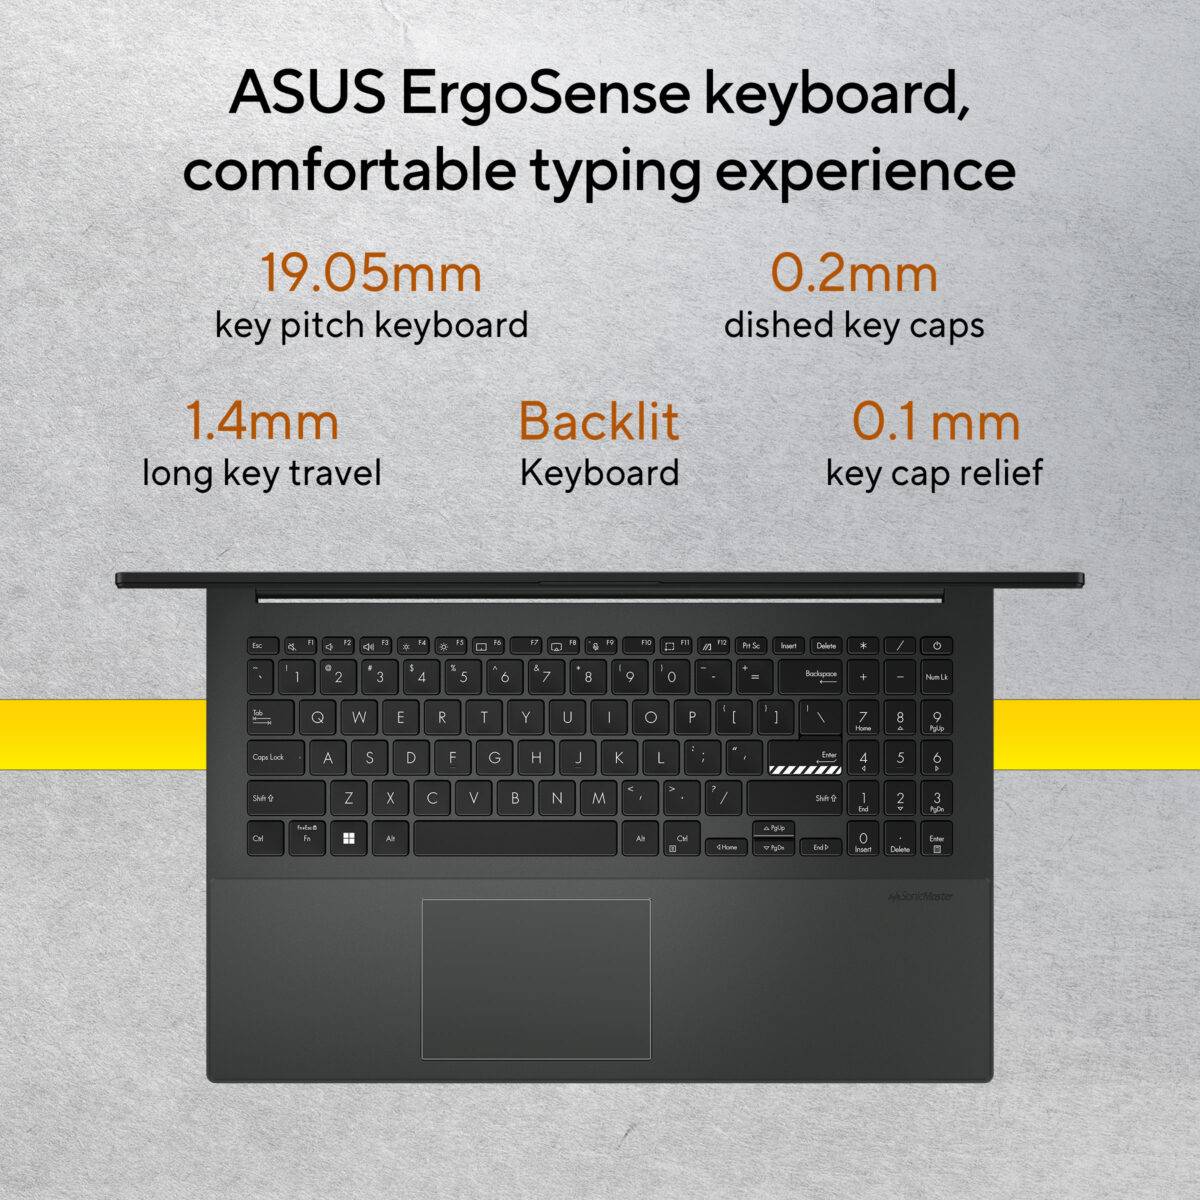 ASUS ErgoSense keyboard typing experience and physical webcam shield for instant privacy.